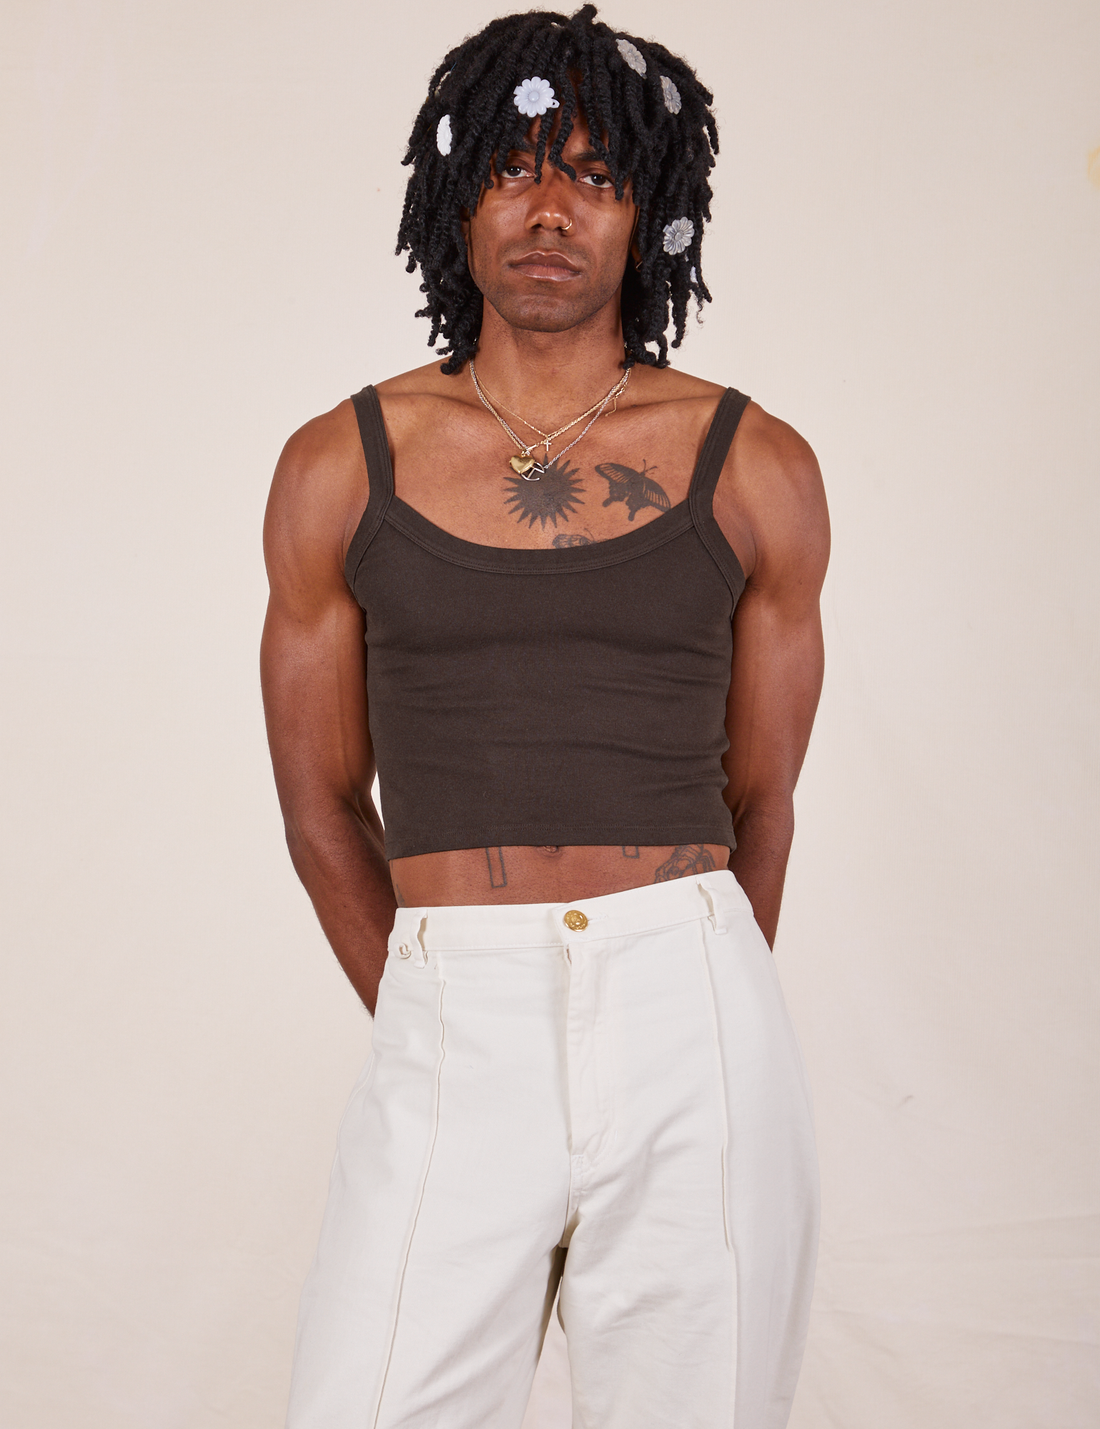 Jerrod is 6'3" and wearing S Cropped Cami in Espresso Brown paired with vintage off-white Western Pants